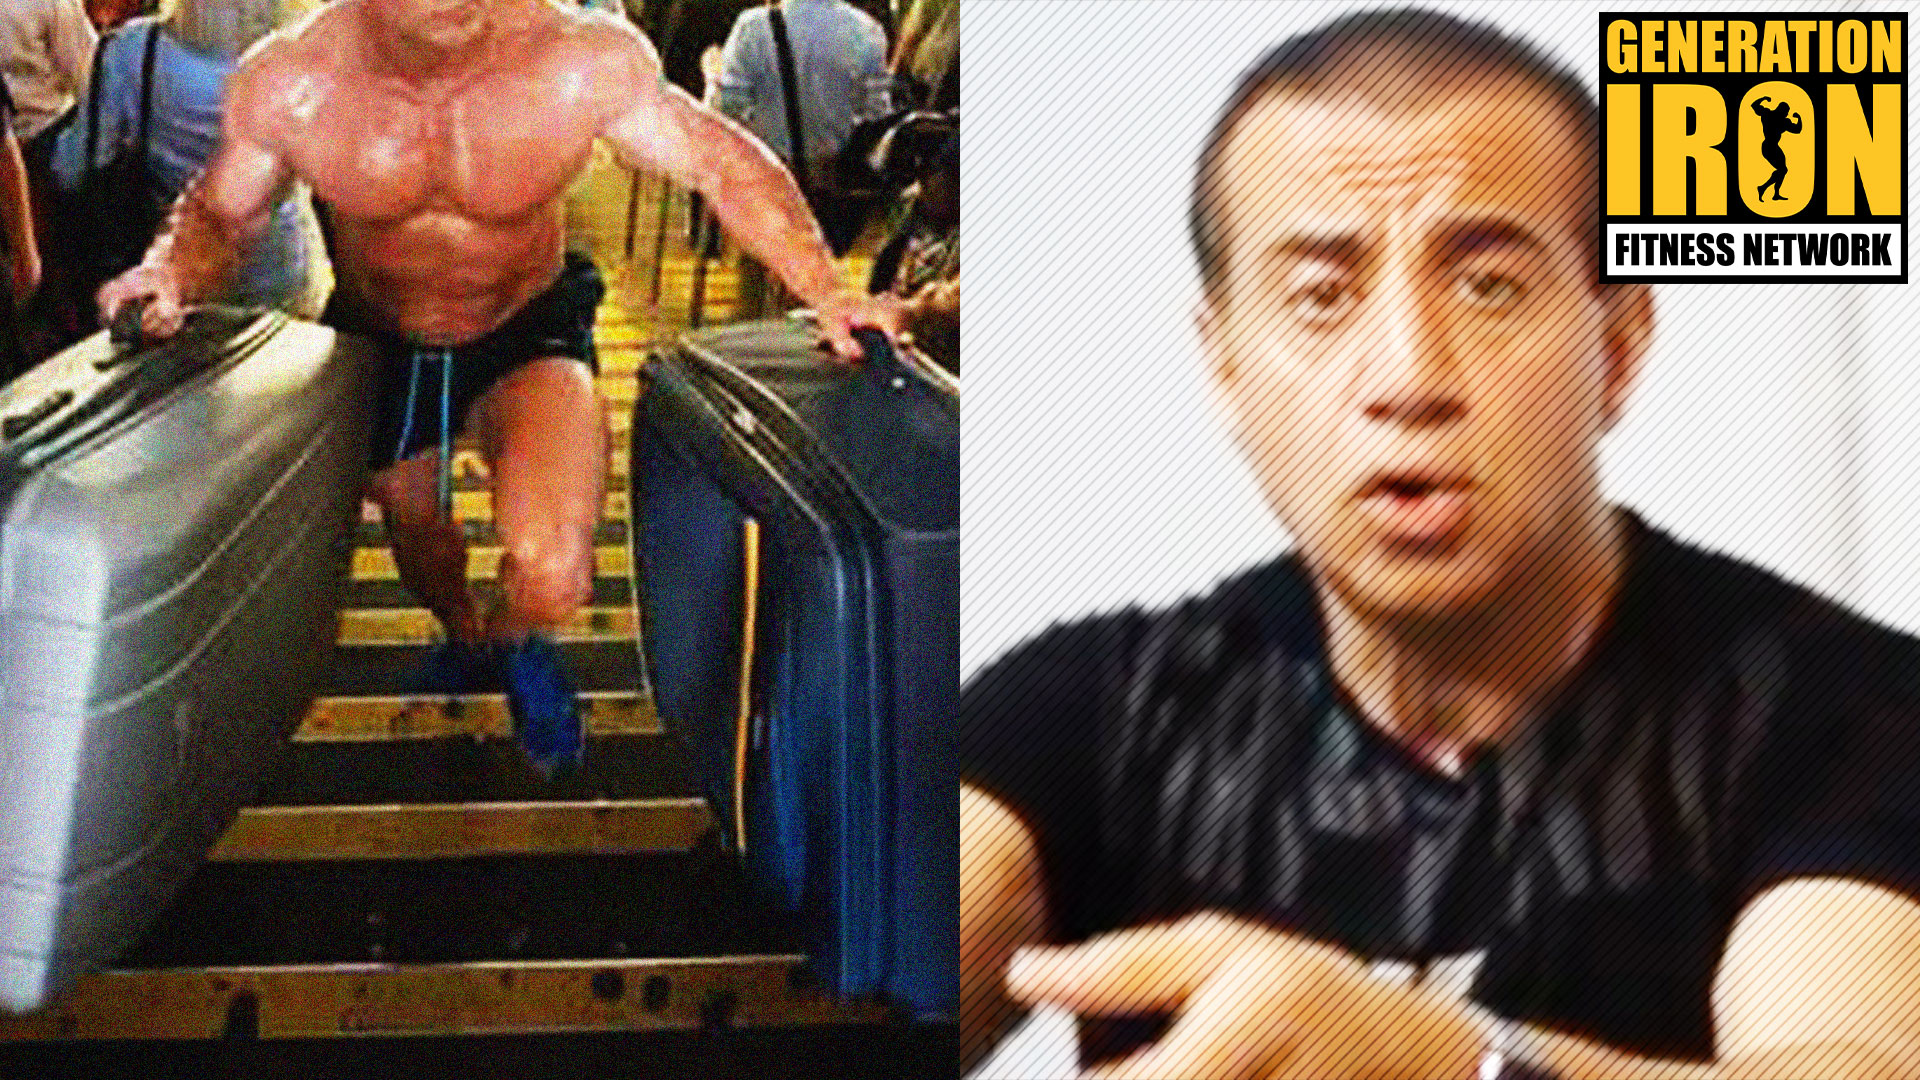 George Farah: How To Travel Before A Competition Without Ruining Your Physique